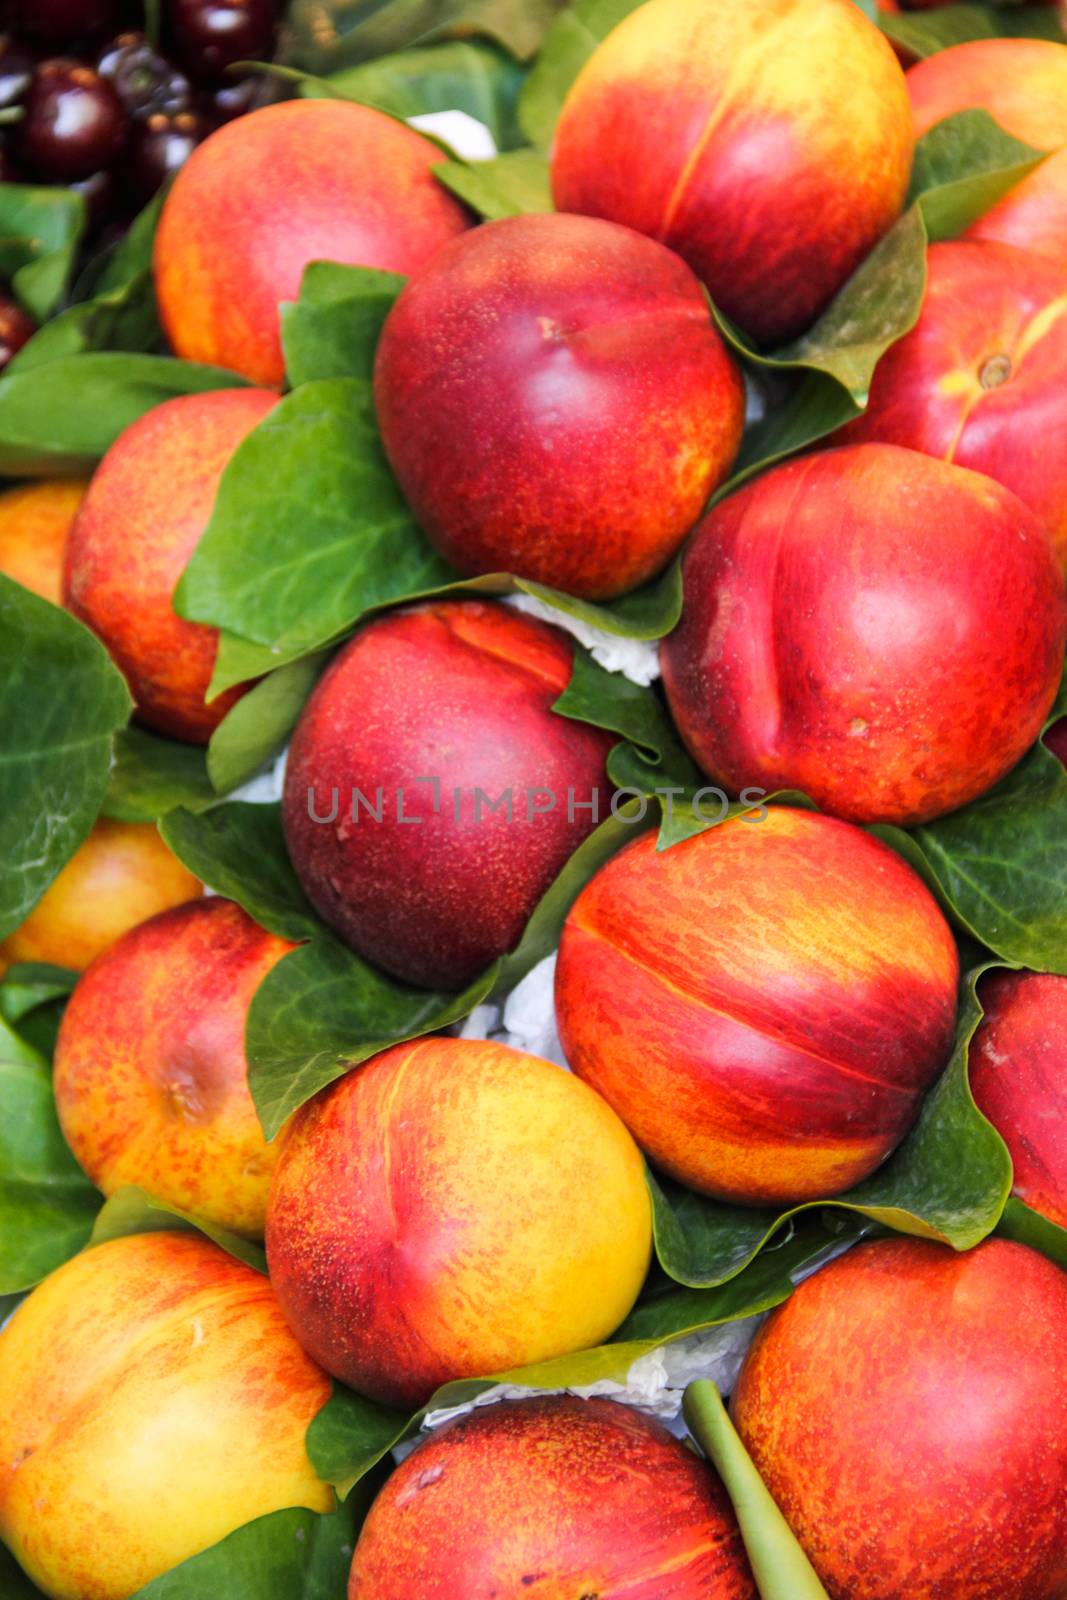 Lot of red fresh nectarine fruits with leaves at market, food background